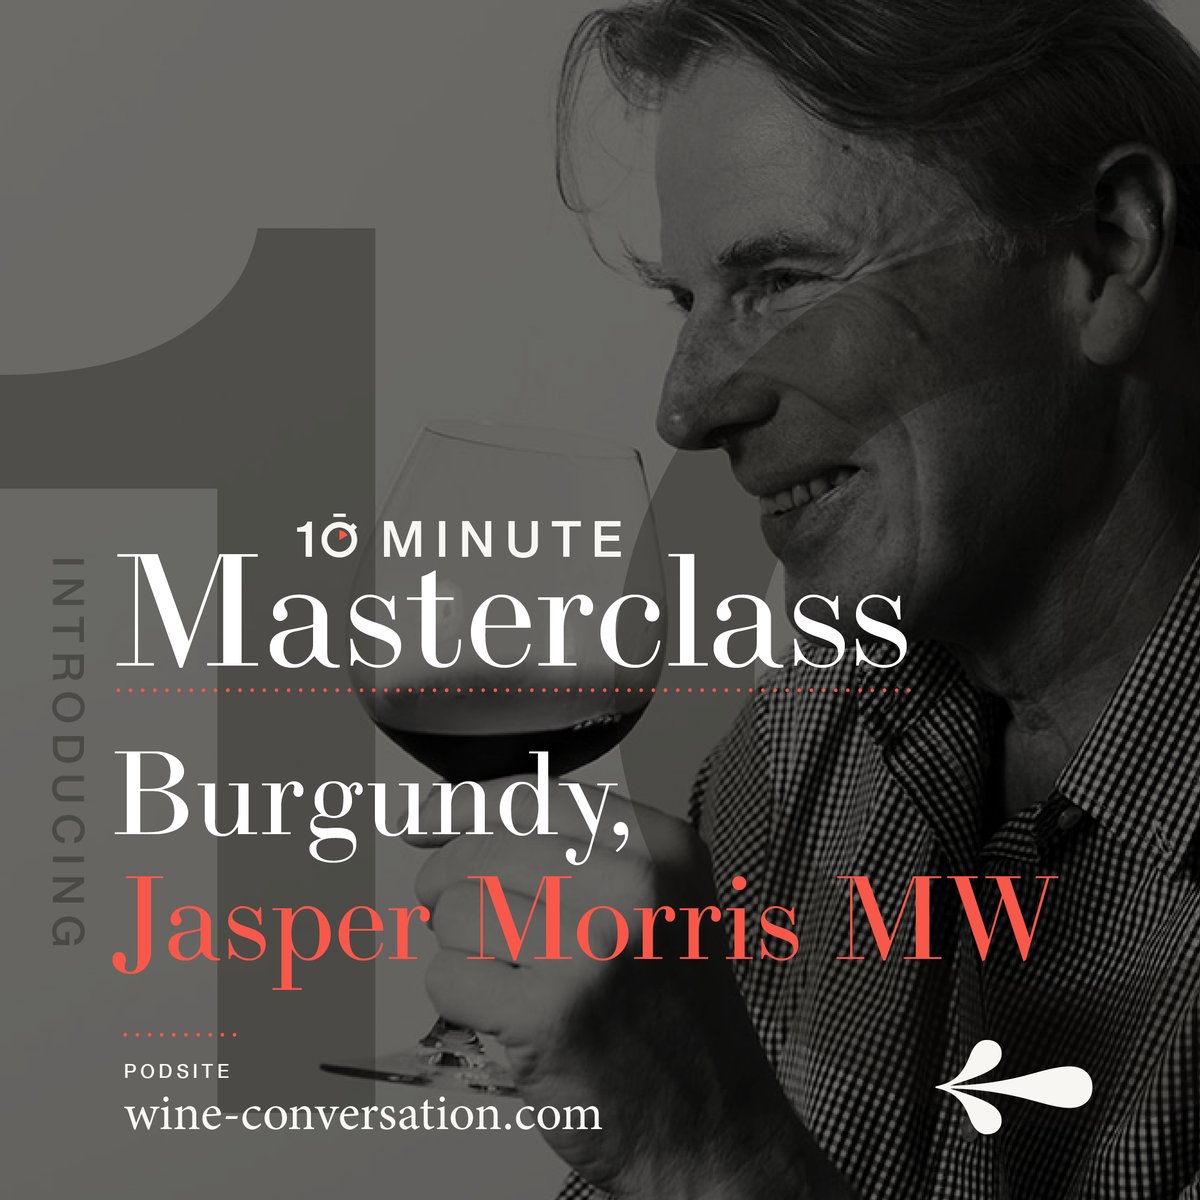 Exciting news! Next week we launch a new series of #10MinuteMasterclasses–the brilliant Jasper Morris MW joins us to give his insights on Burgundy (starting with Nuits-St-Georges). His website insideburgundy.com is essential reading for any serious Burgundy lover. Unmissable